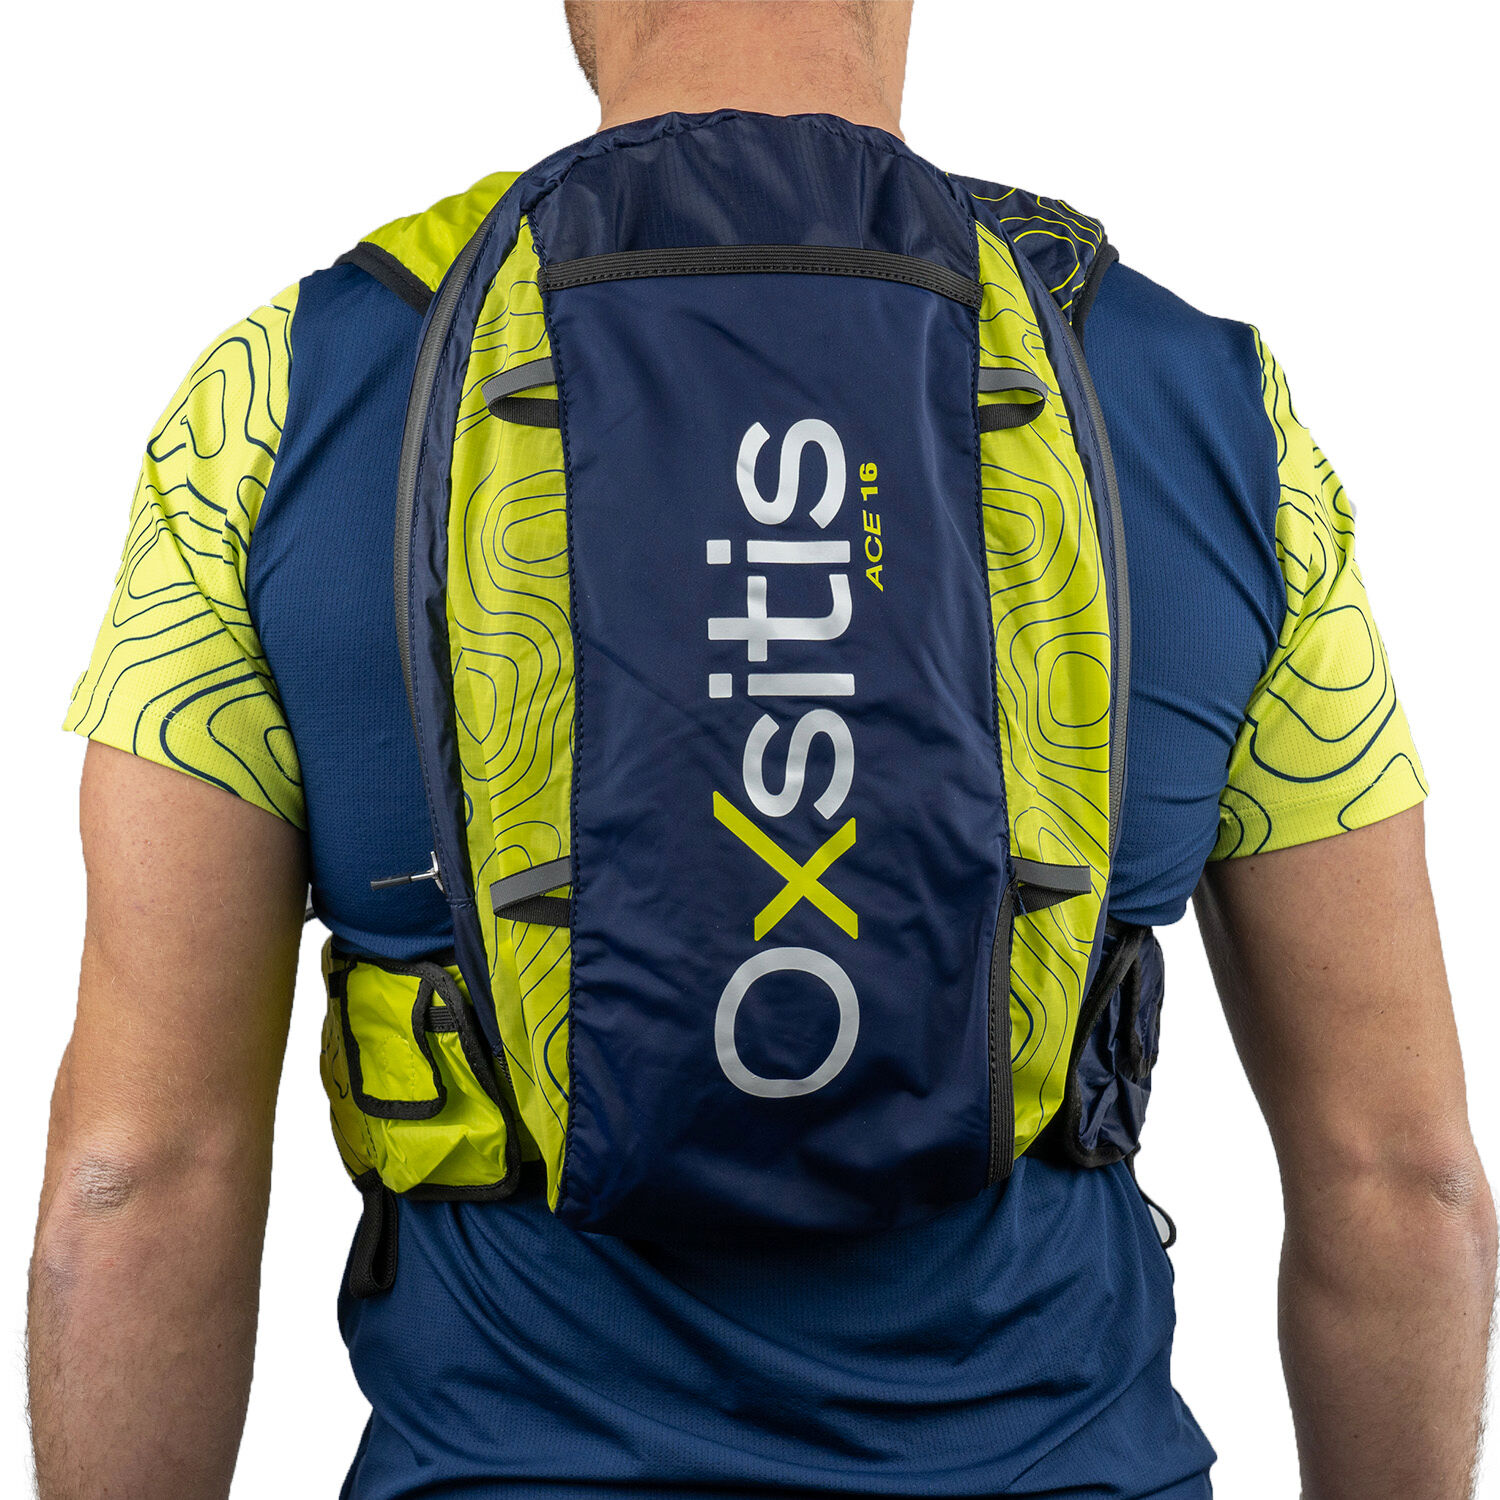 Oxsitis Ace 16 Ultra - Trail running backpack